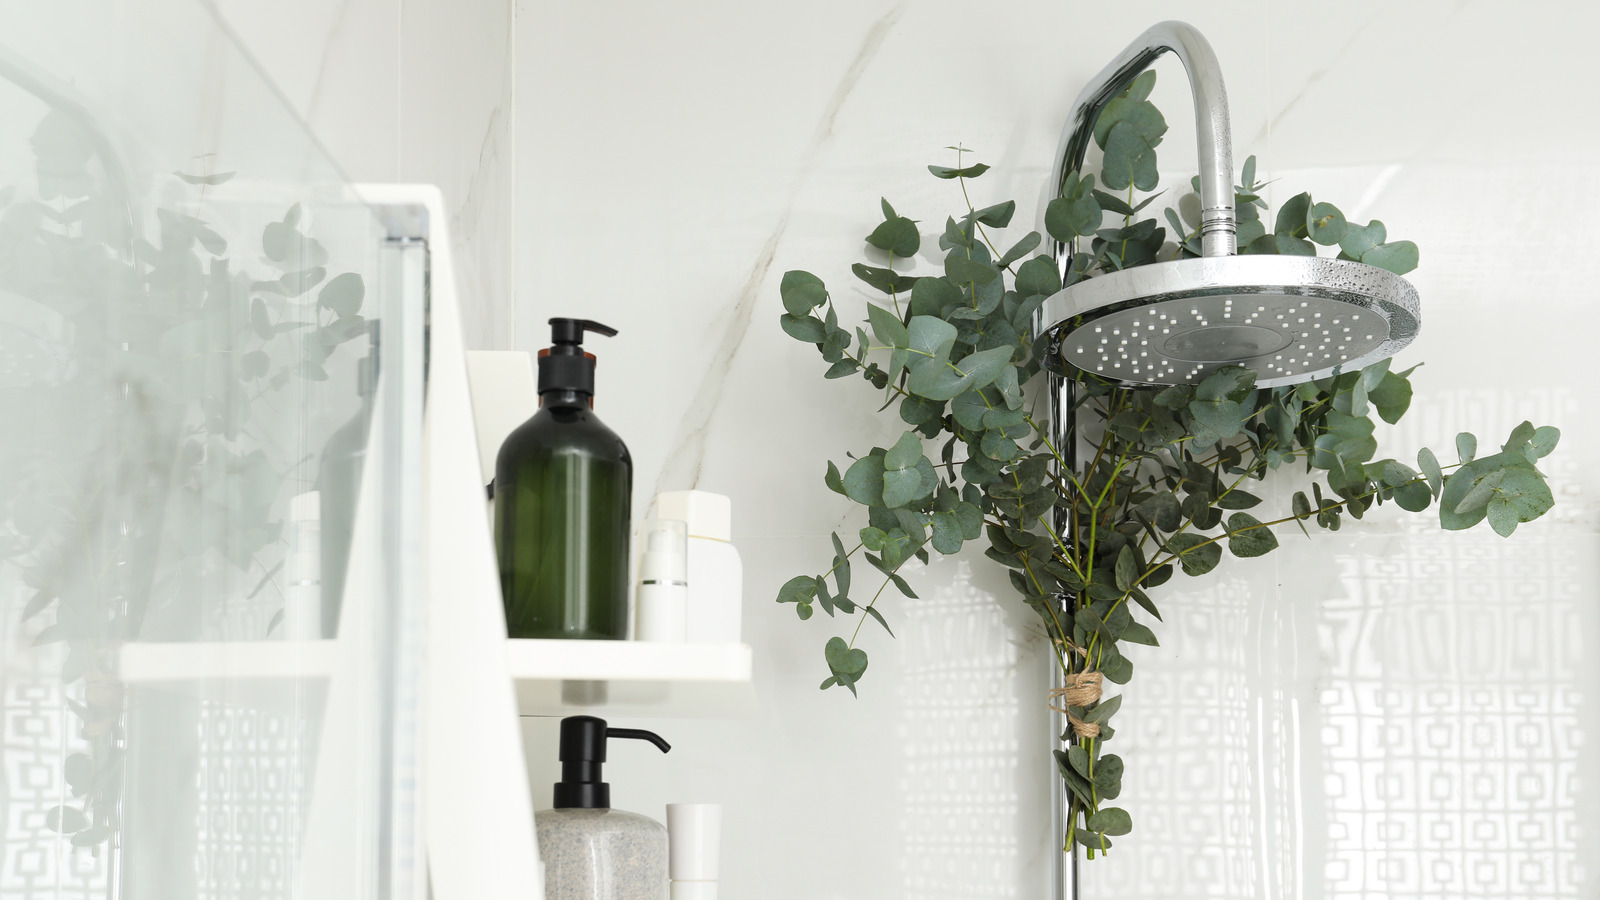 https://www.glam.com/img/gallery/this-aesthetic-shower-trend-has-actual-health-benefits/l-intro-1658417551.jpg